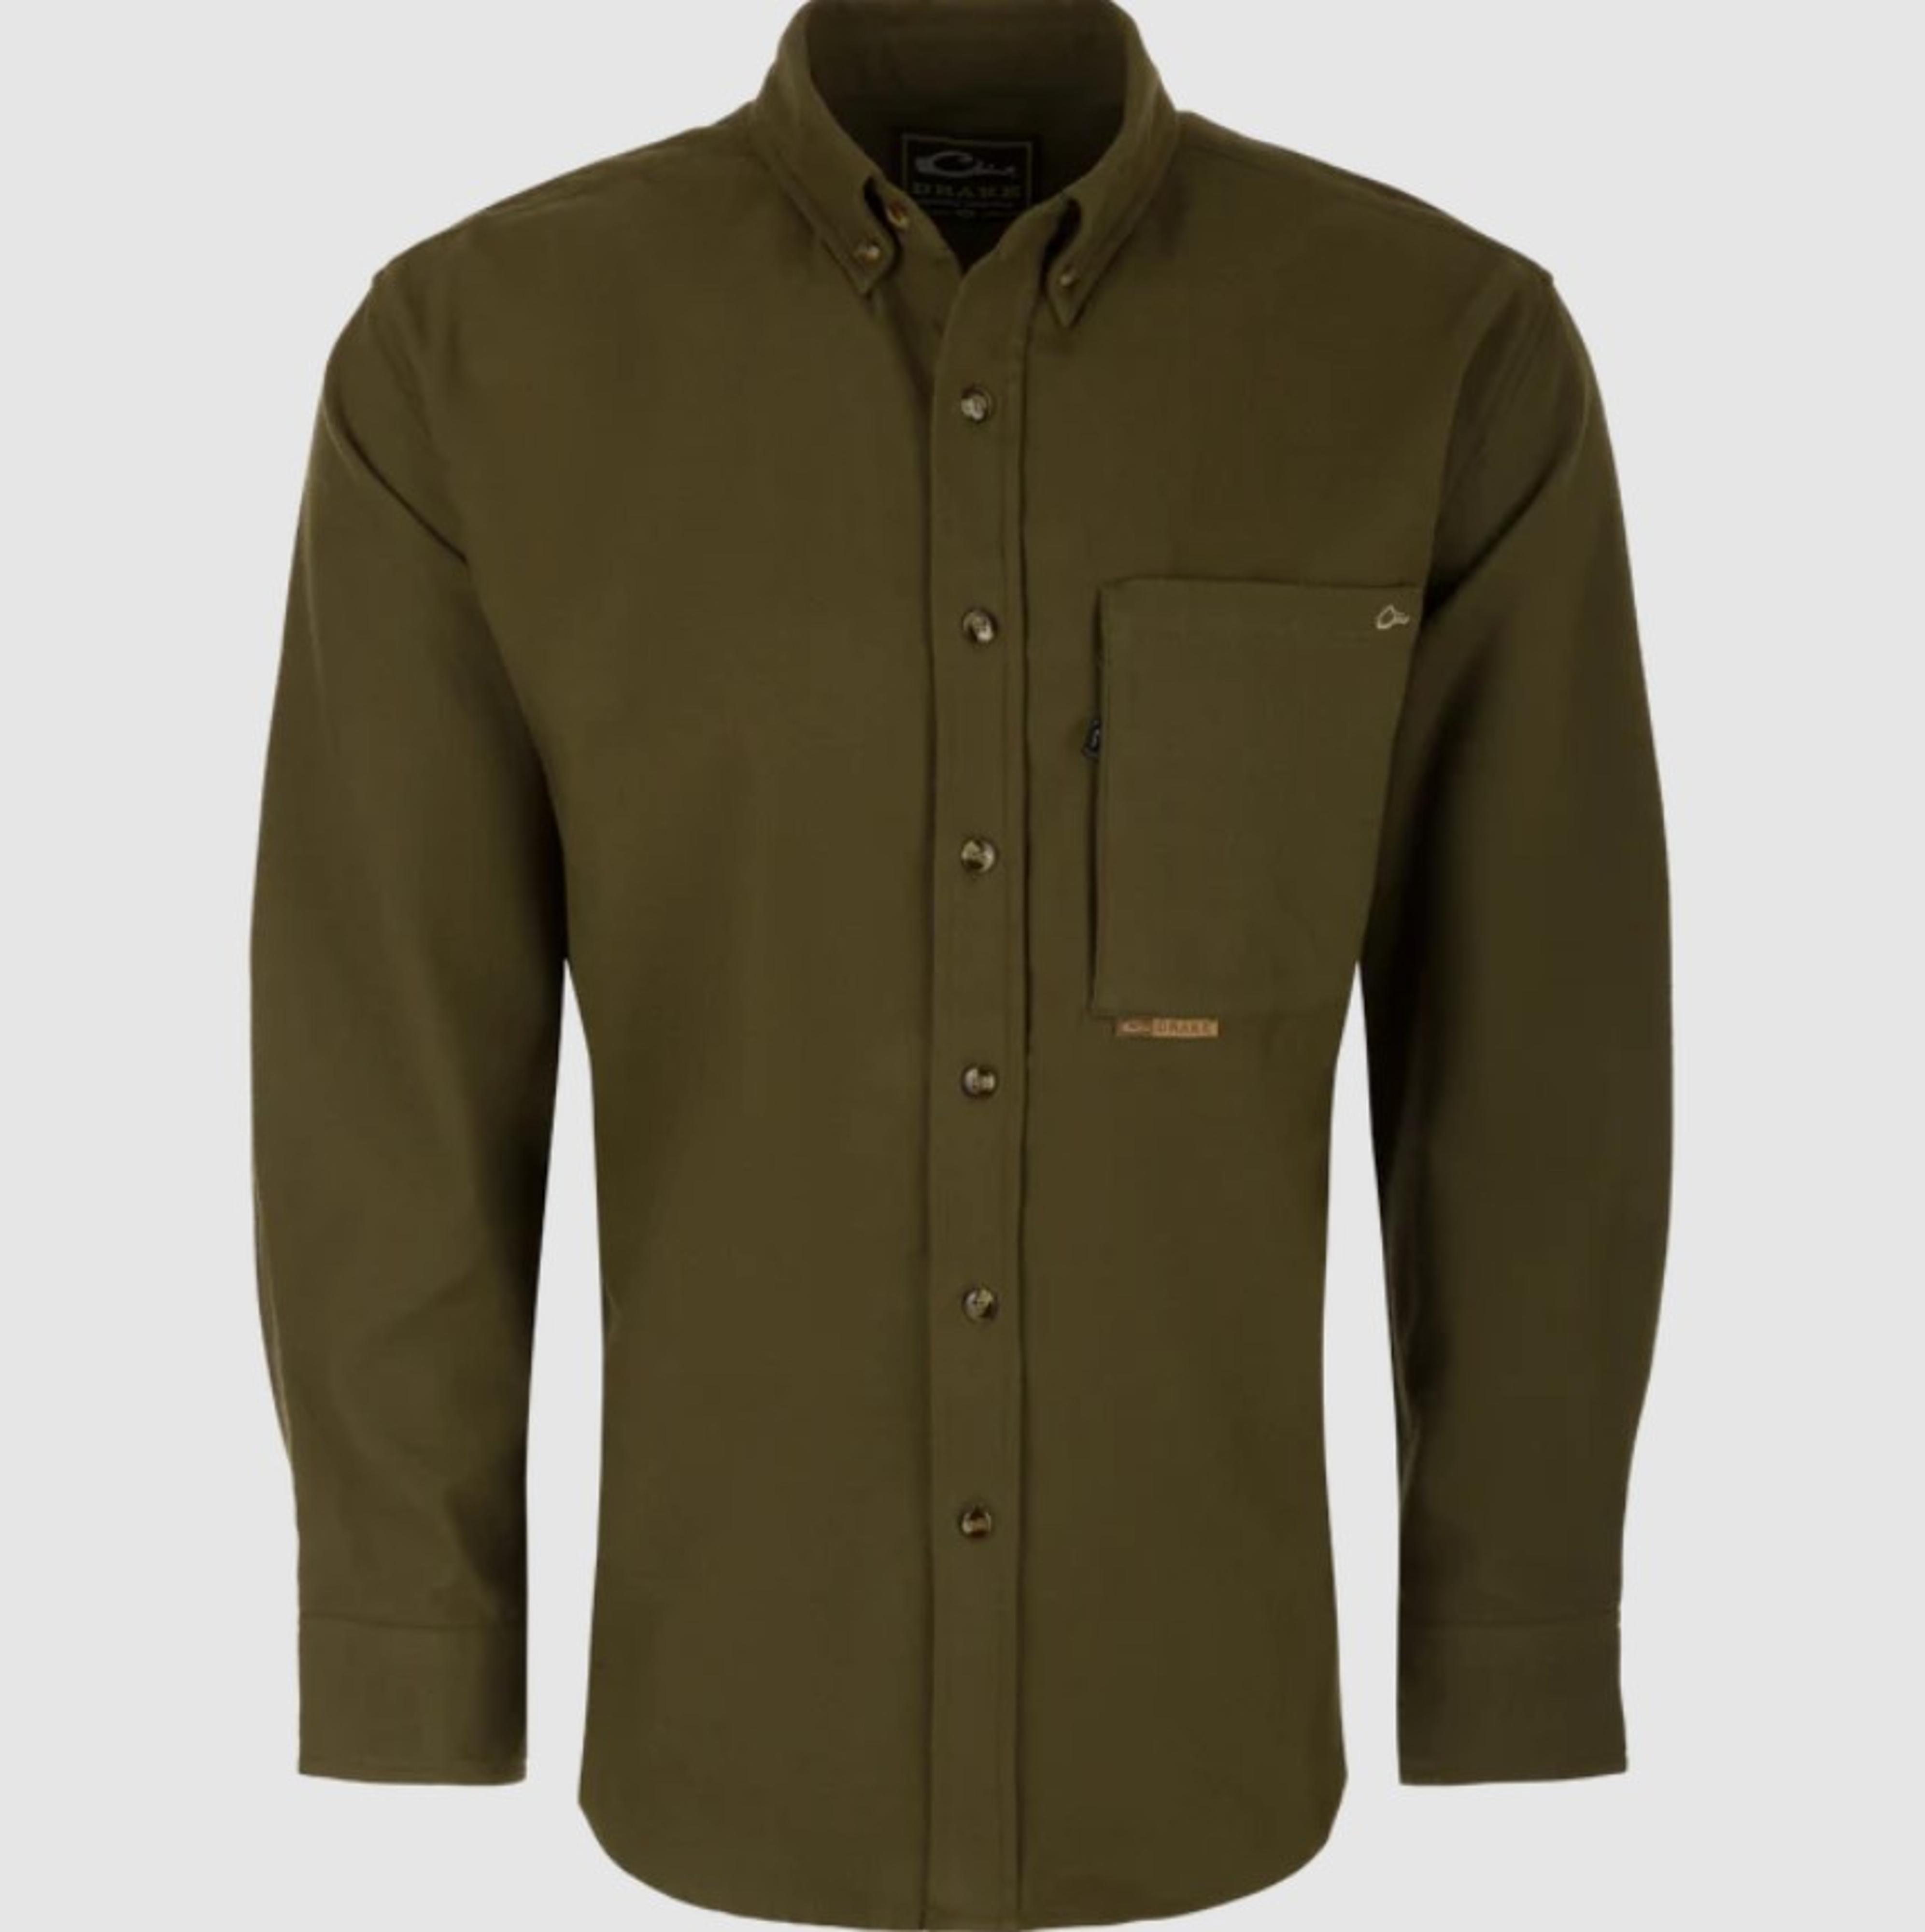  Autumn Brushed Twill Solid Ls Shirt